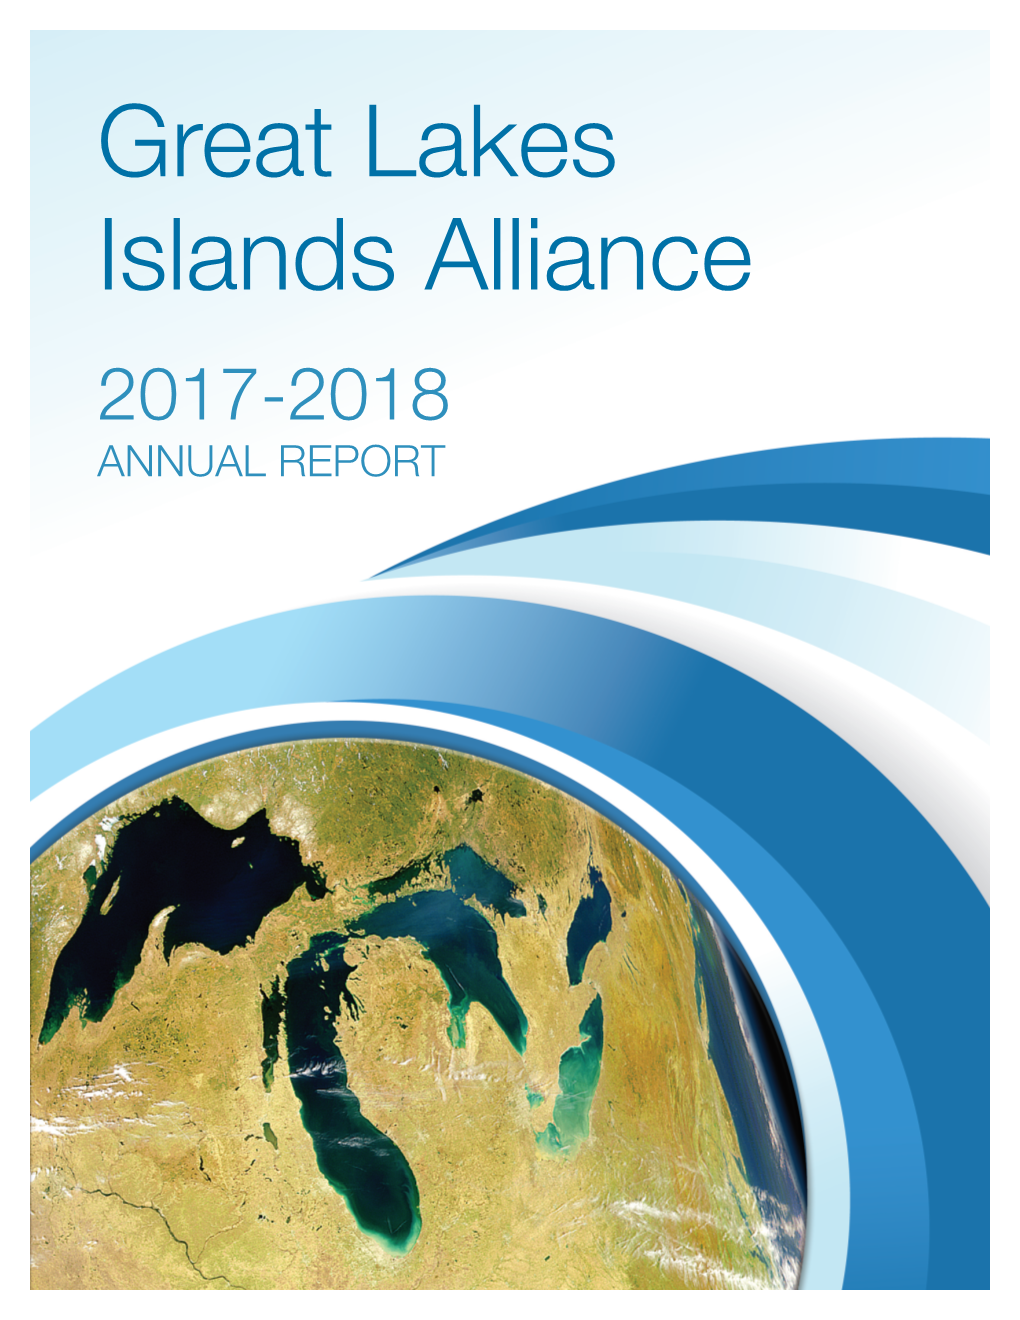 Great Lakes Islands Alliance